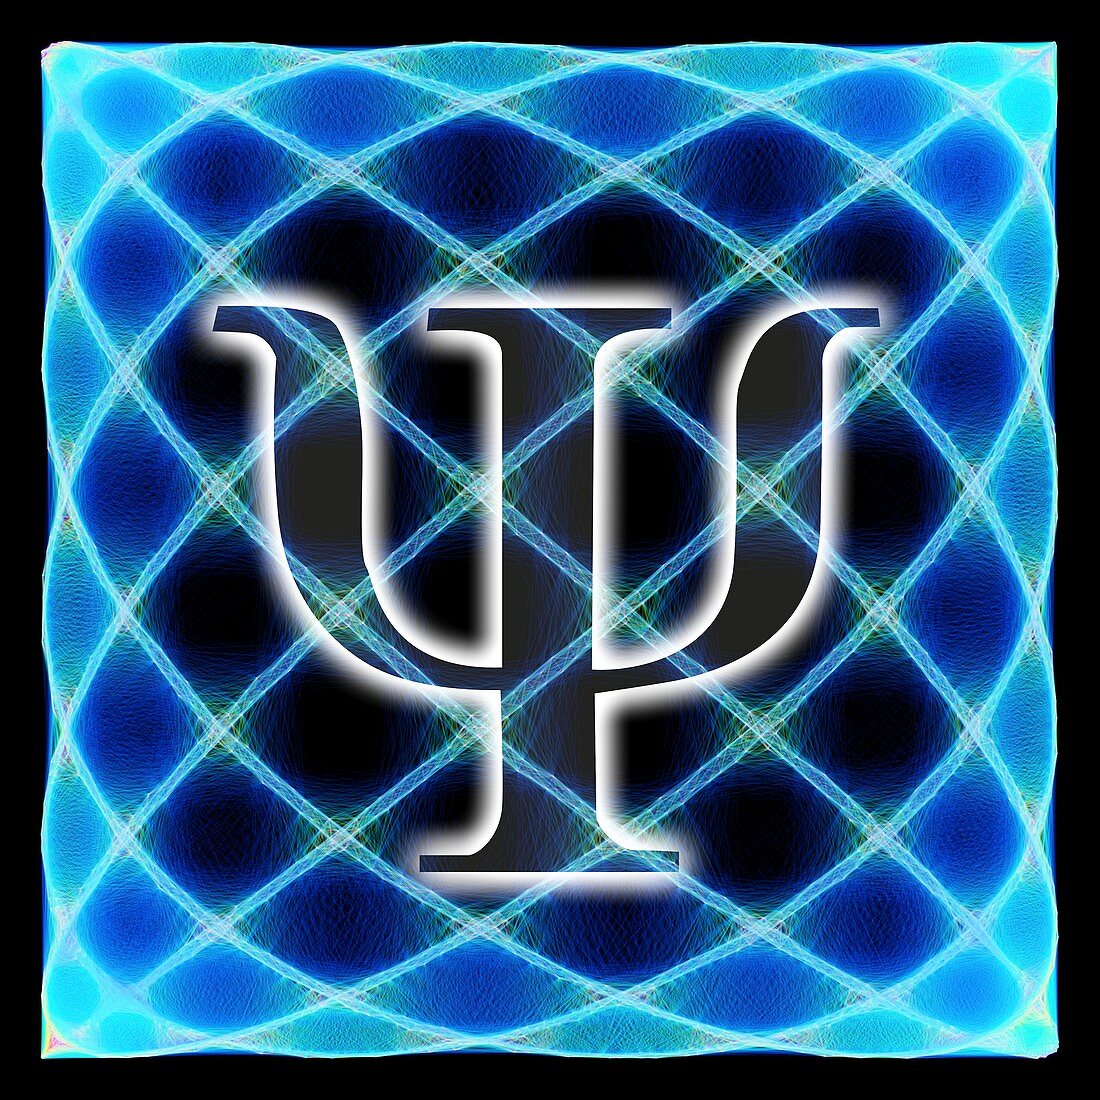 Psi symbol and artwork of a wavefunction